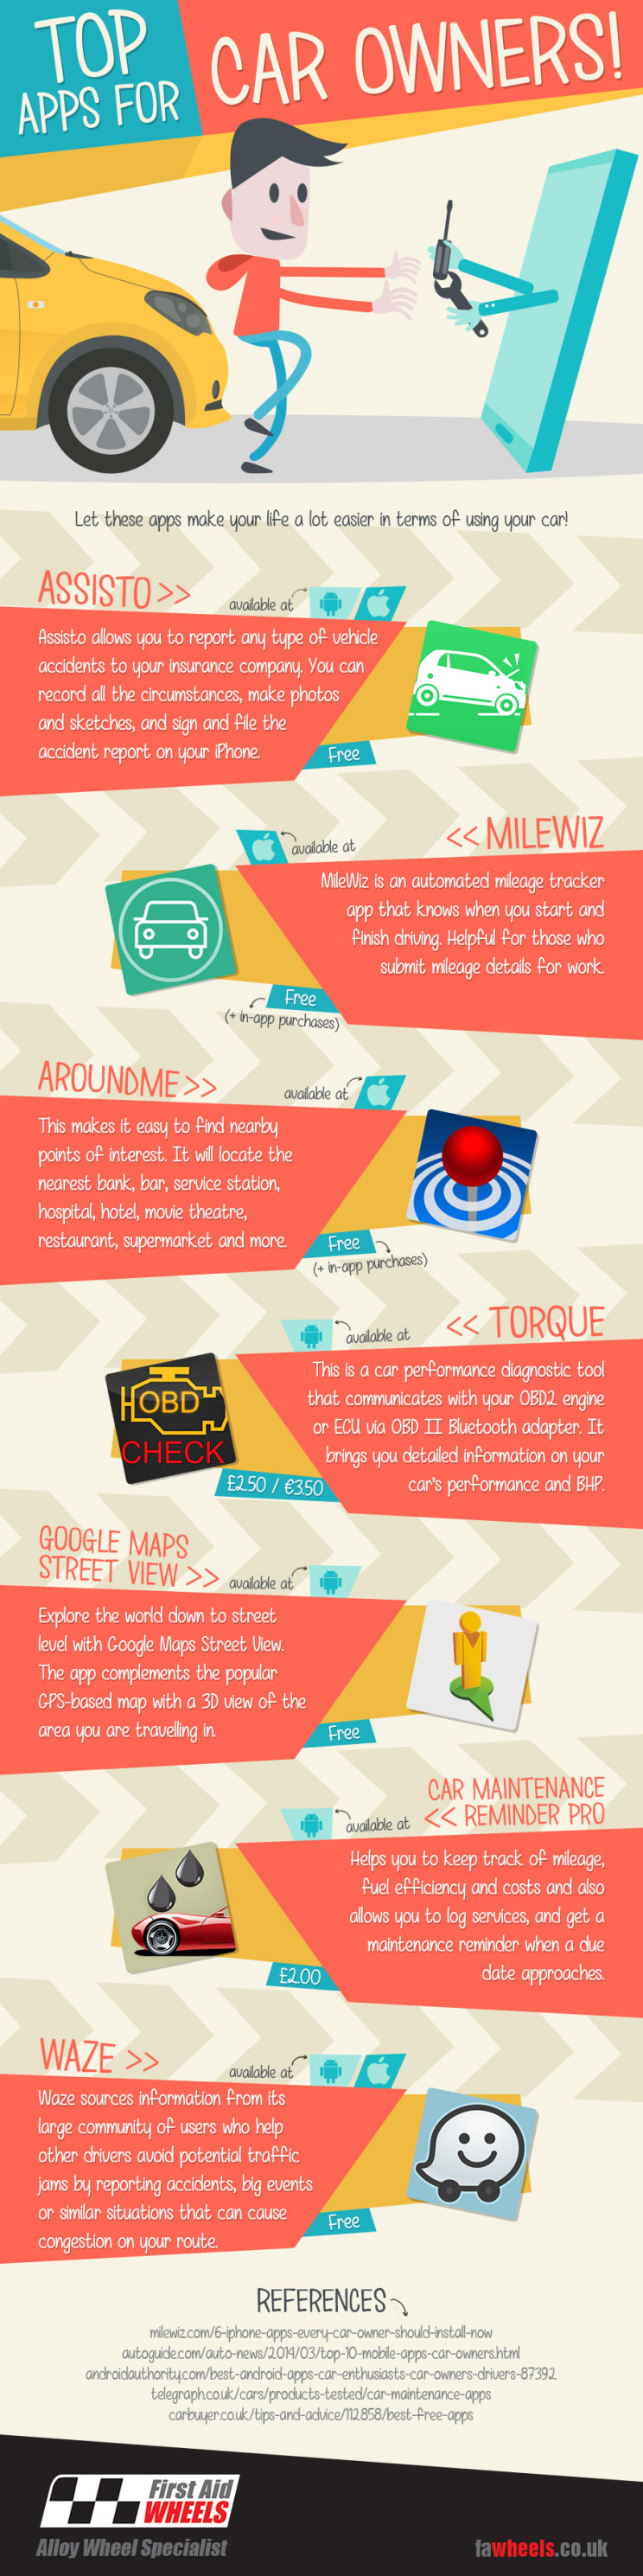 Car-Apps-Infographic (2)